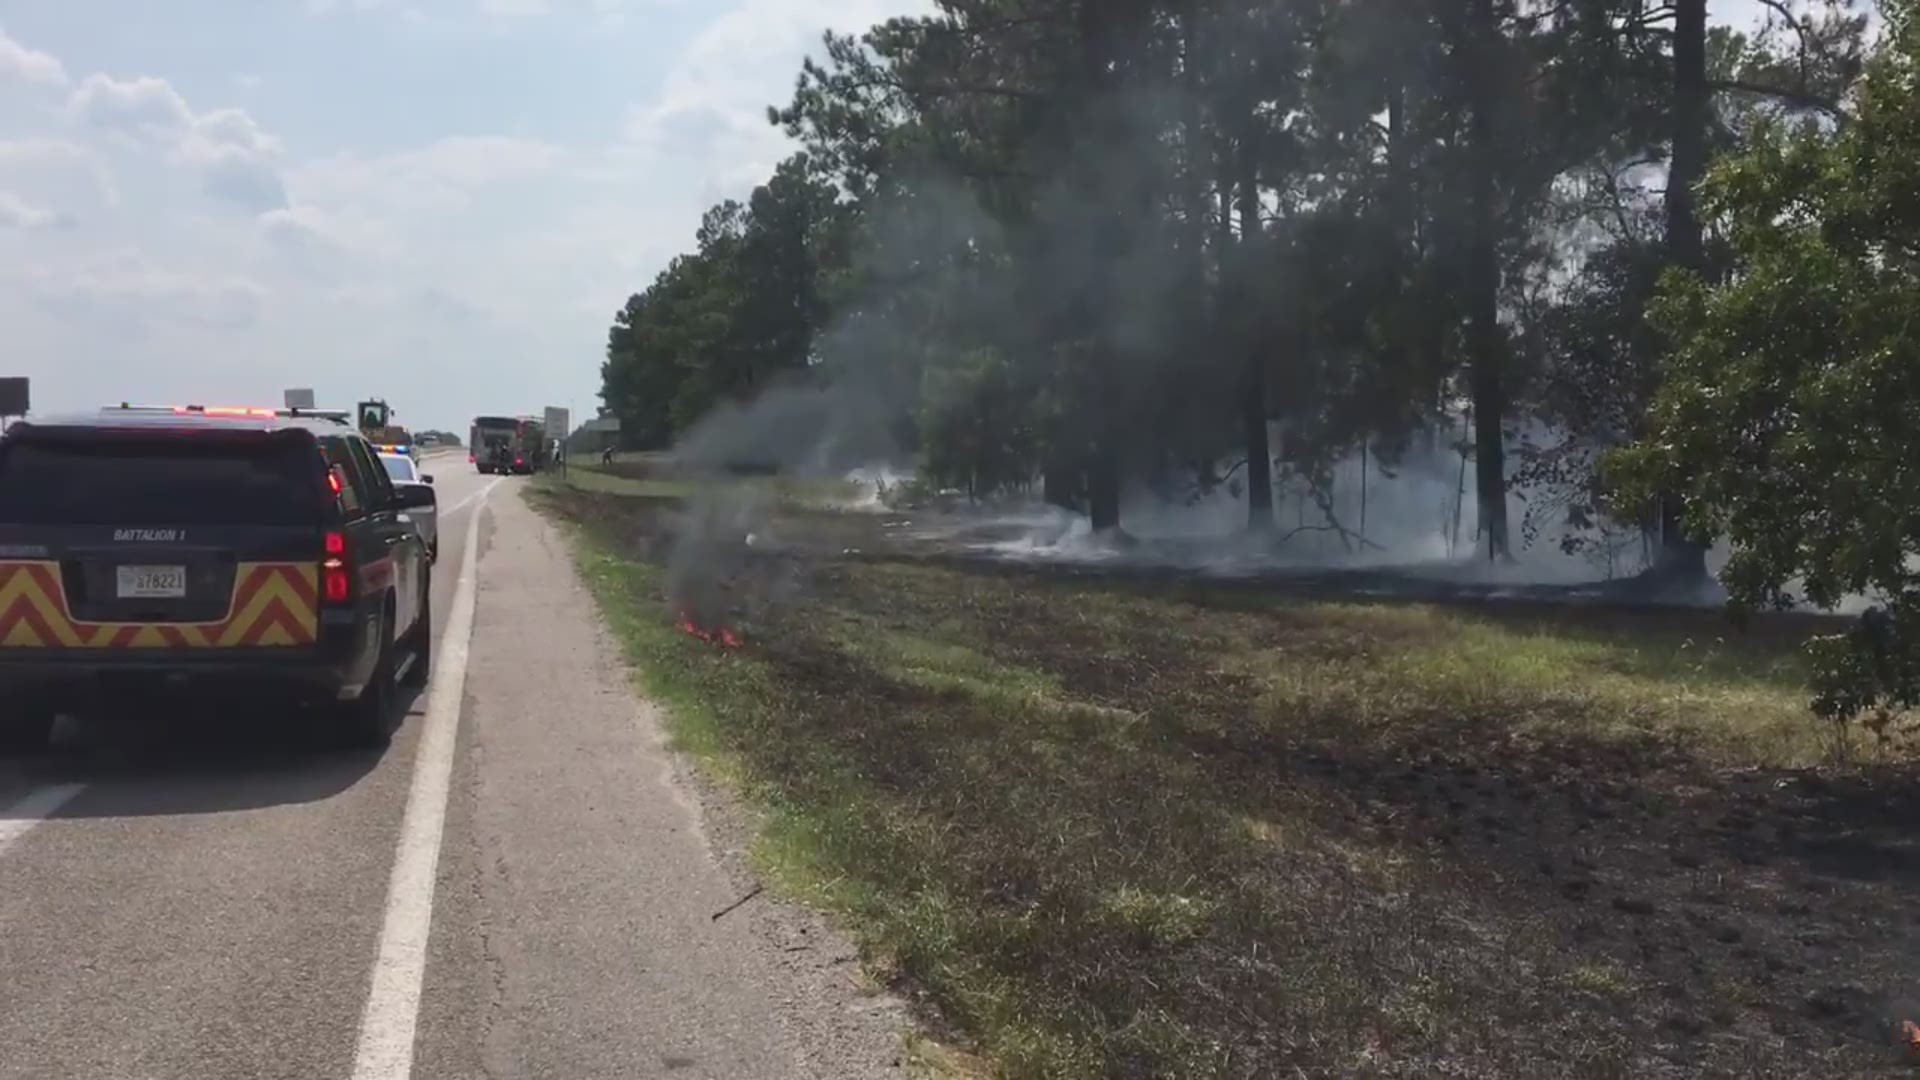 Crews are fighting a brush fire along I-20 near mile marker 55. Drivers should expect delays in the area.